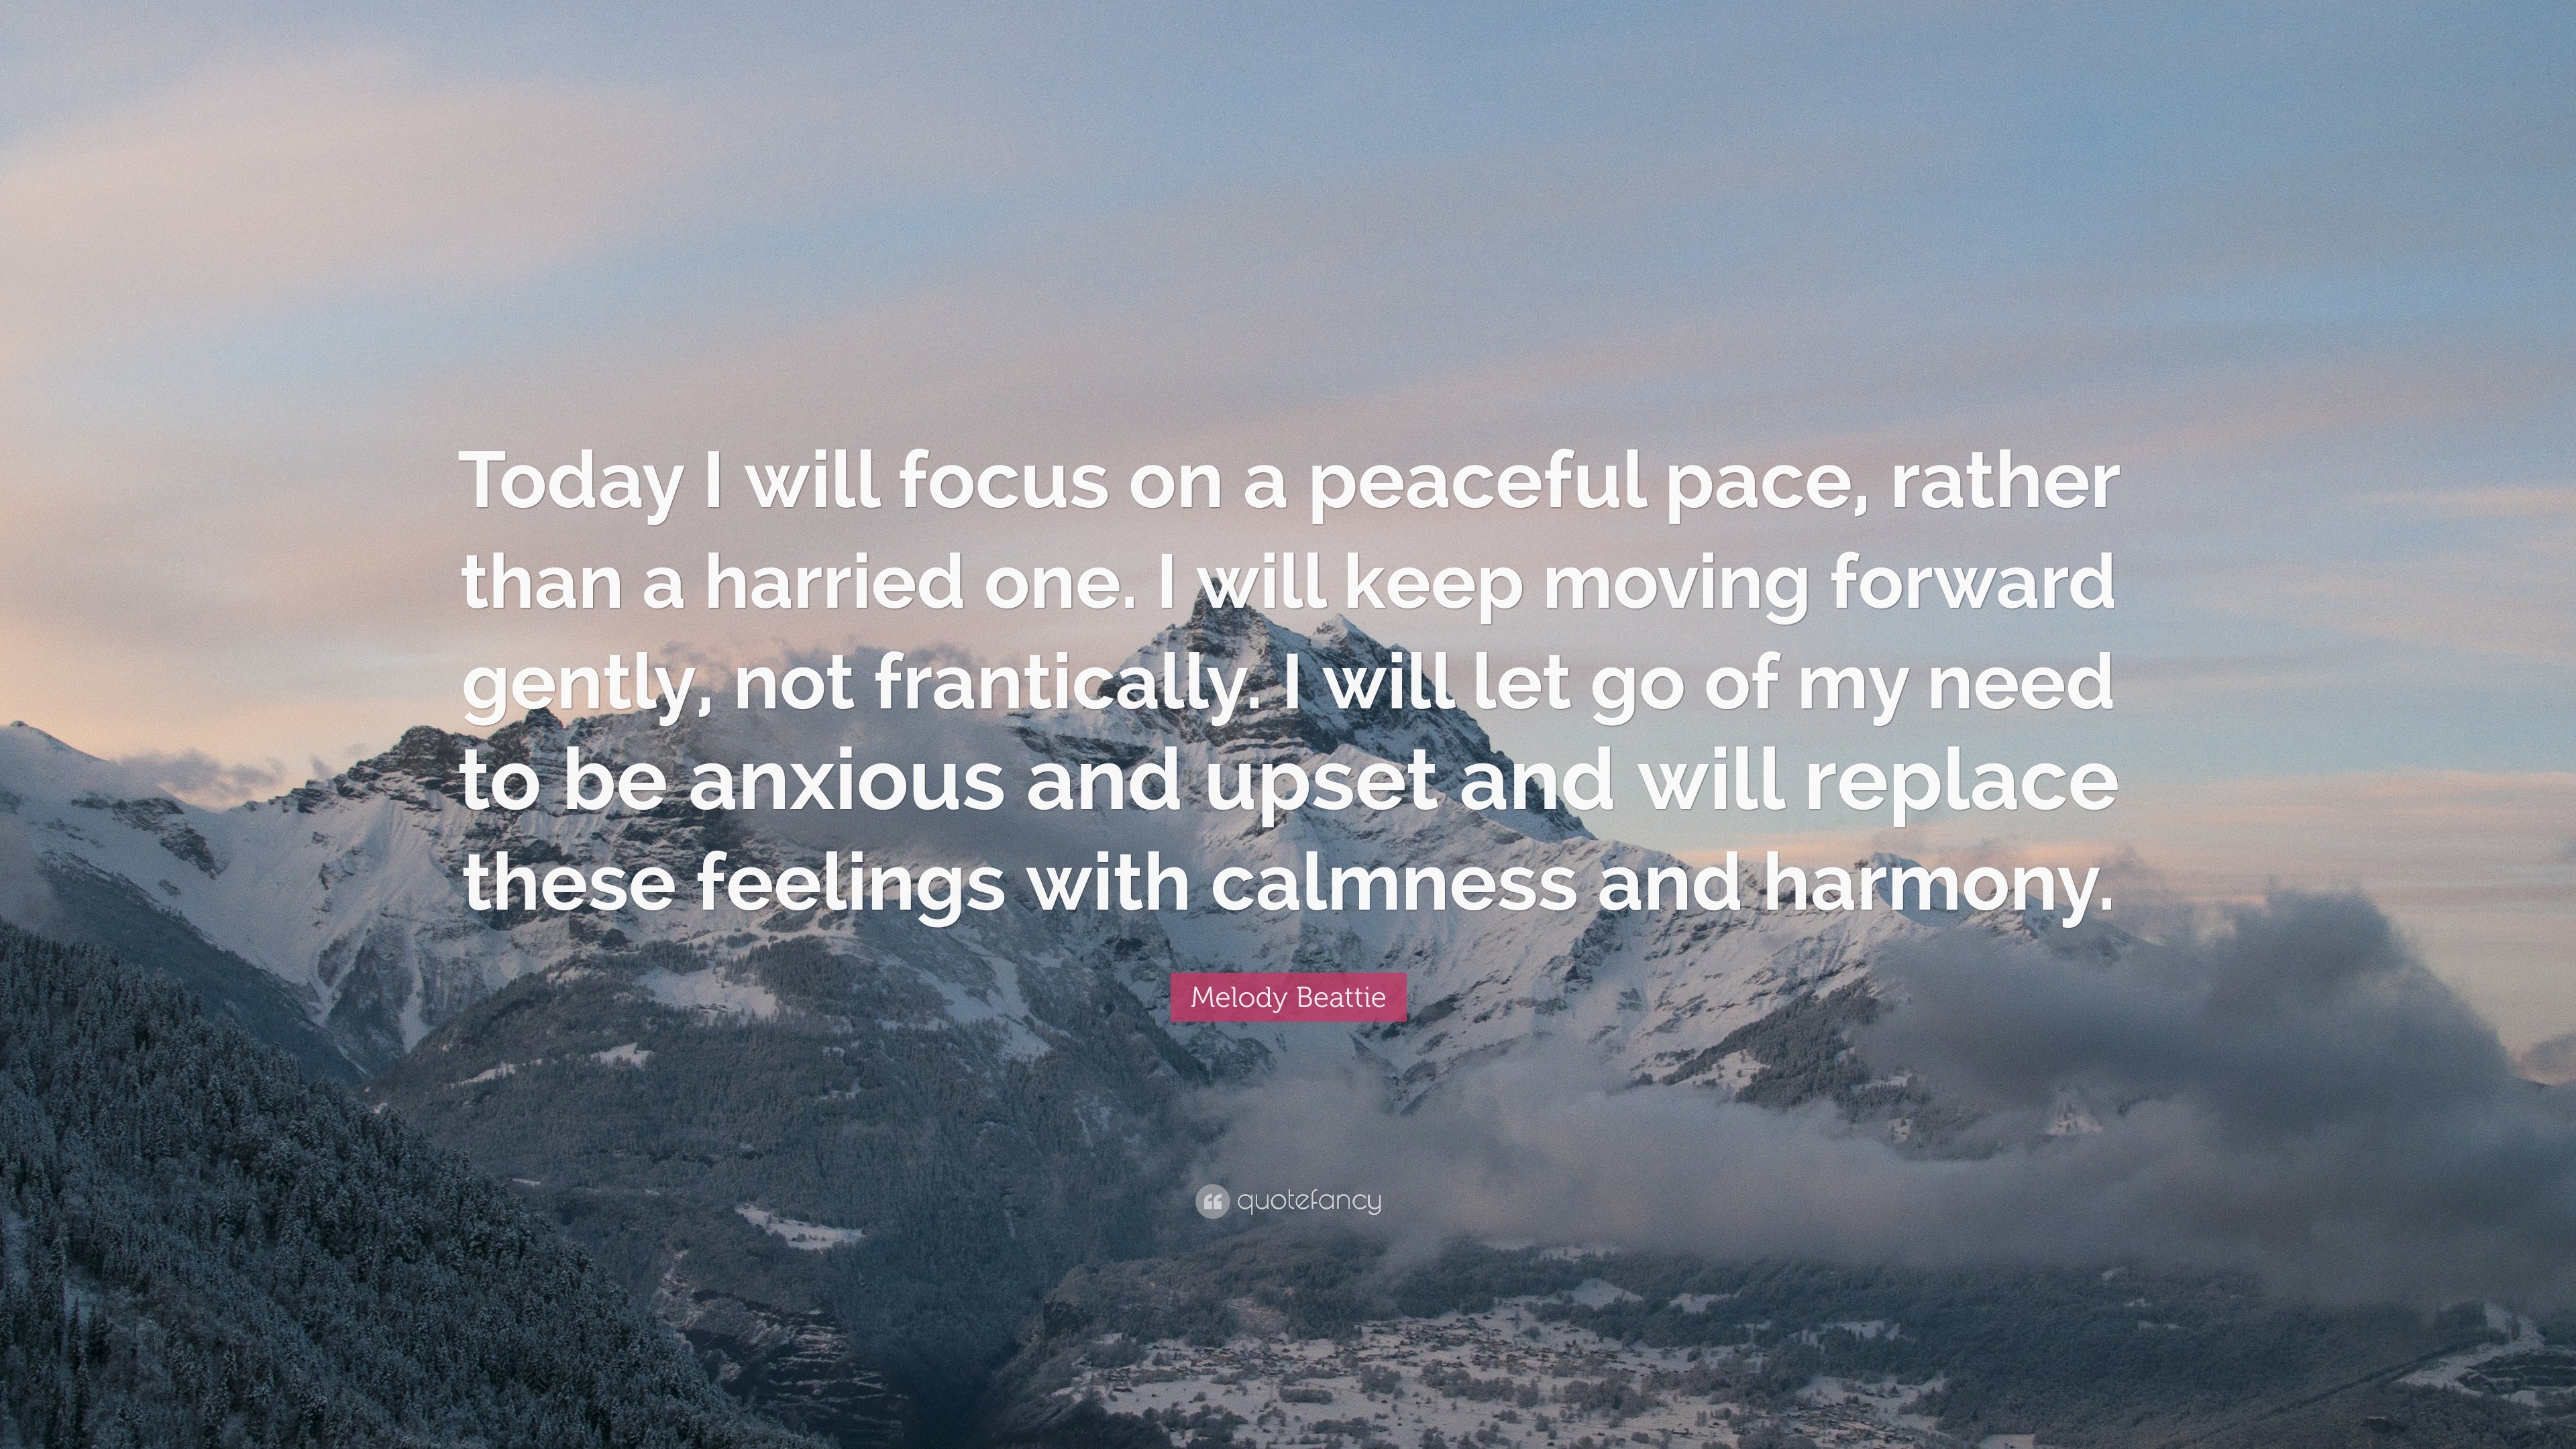 Melody Beattie Quote: “Today I will focus on a peaceful pace, rather ...